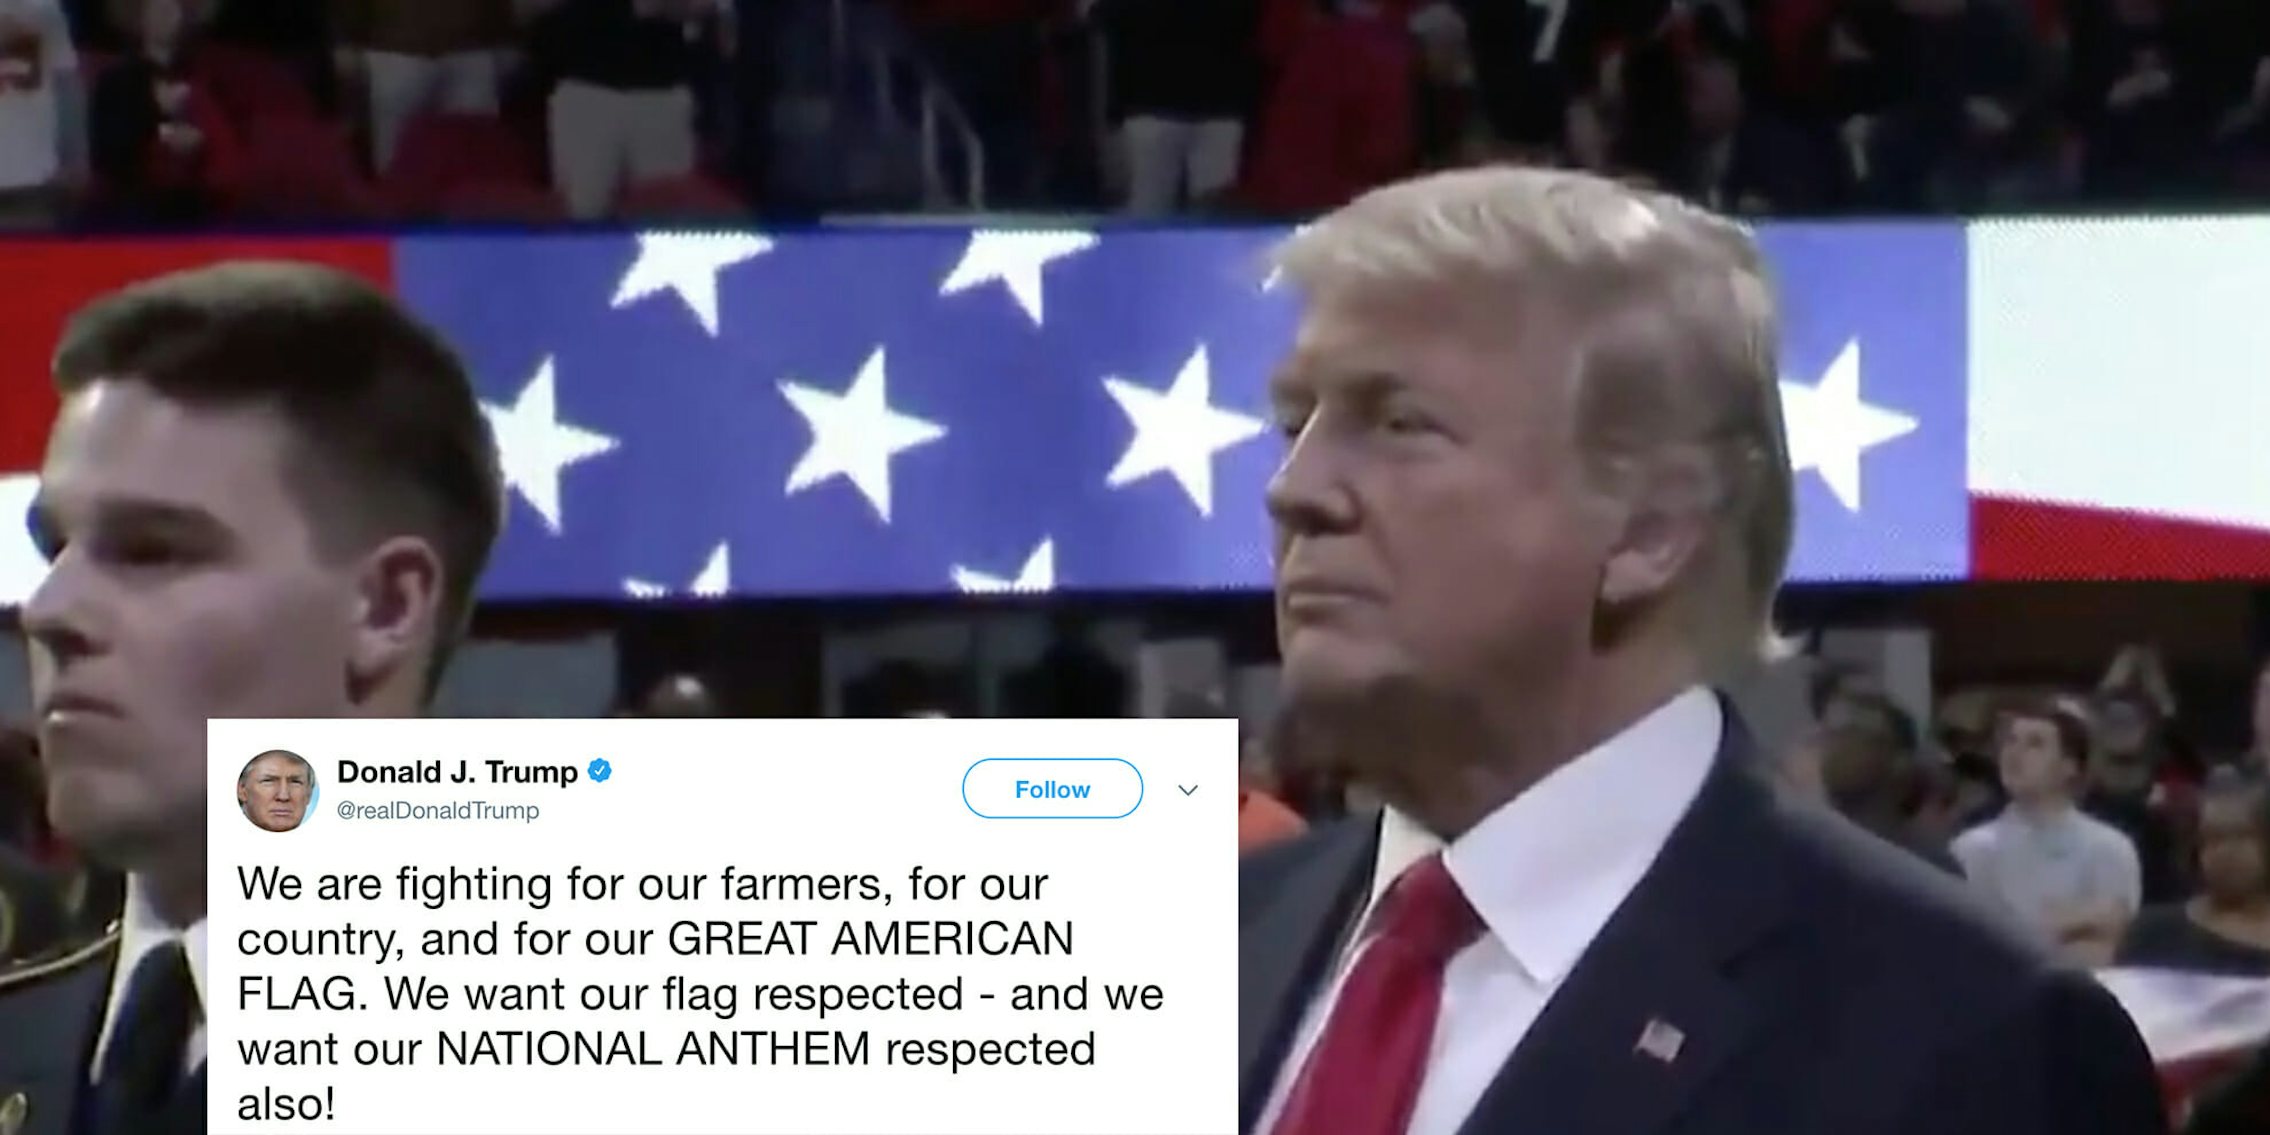 Trump tweets demanding respect for the national anthem and then forgets the lyrics.